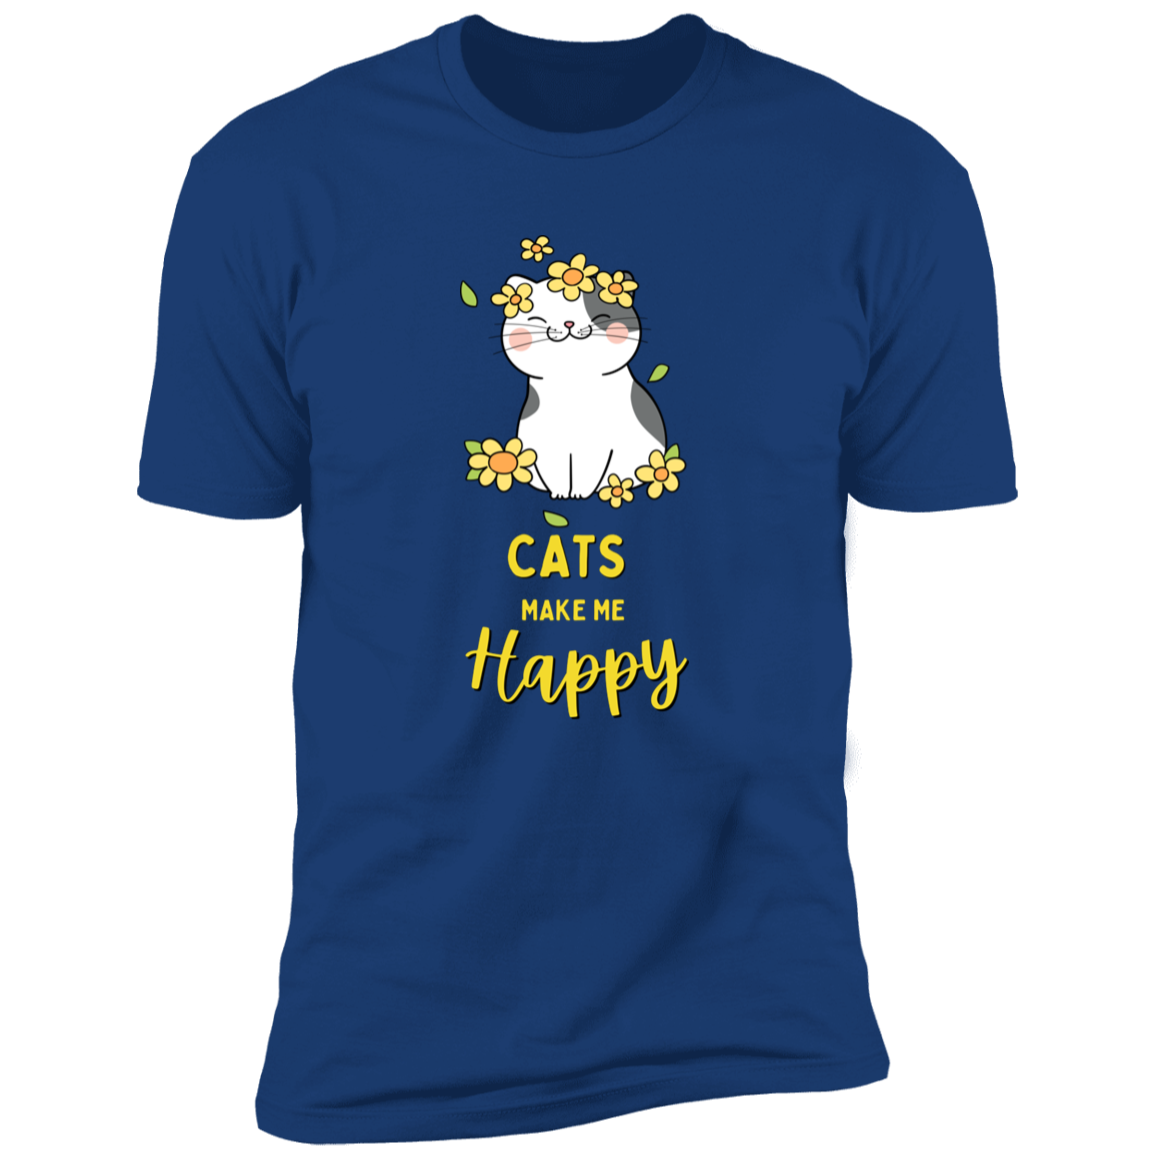 Cats Make Me Happy T-shirt, Cat Shirt for humans, in royal blue